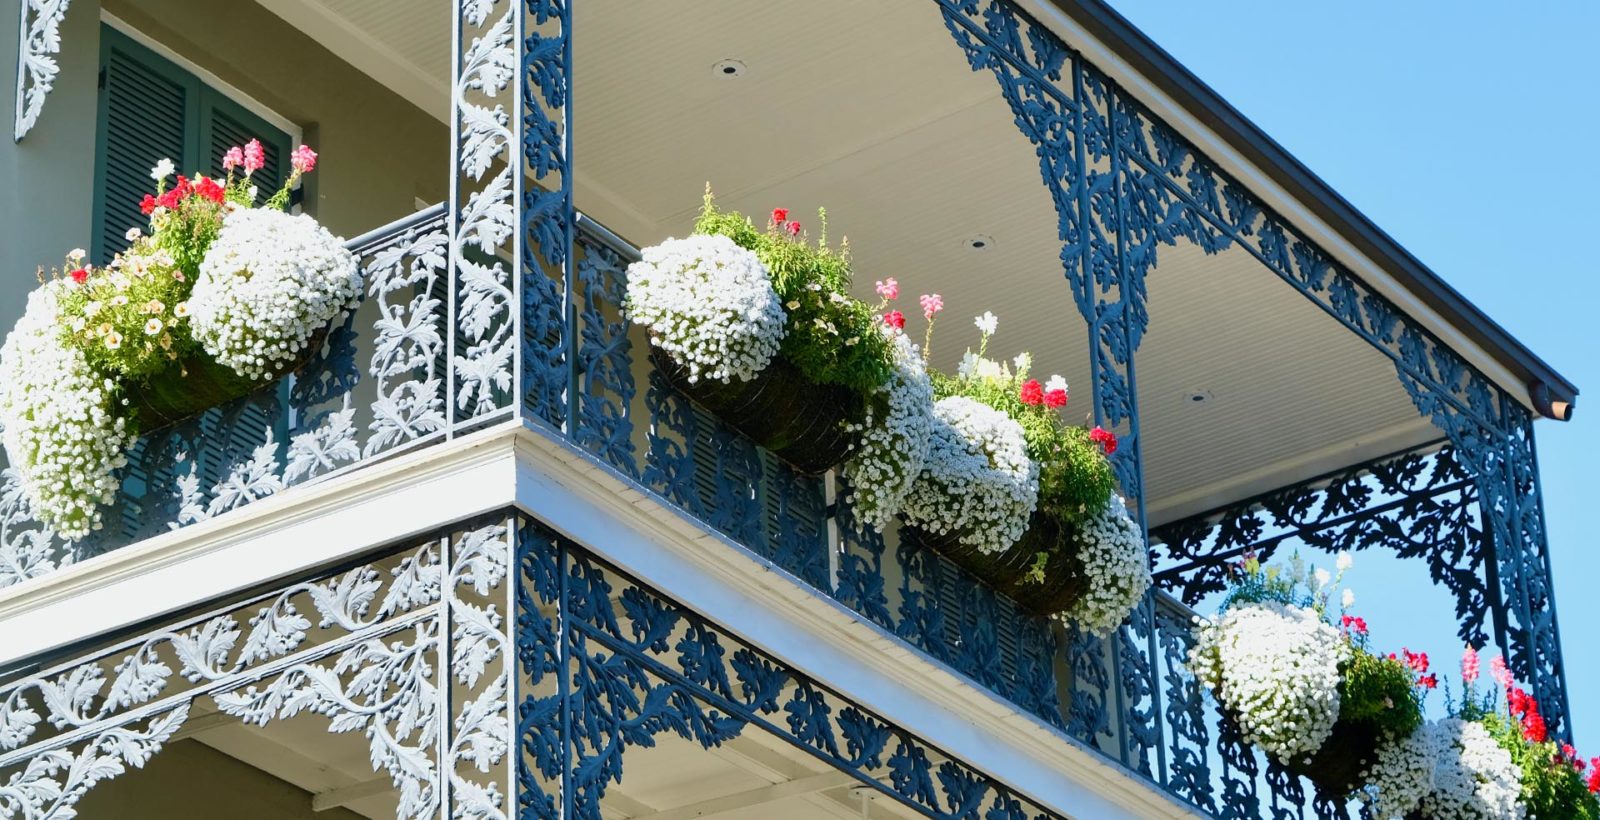 second story balcony with filled with flowers